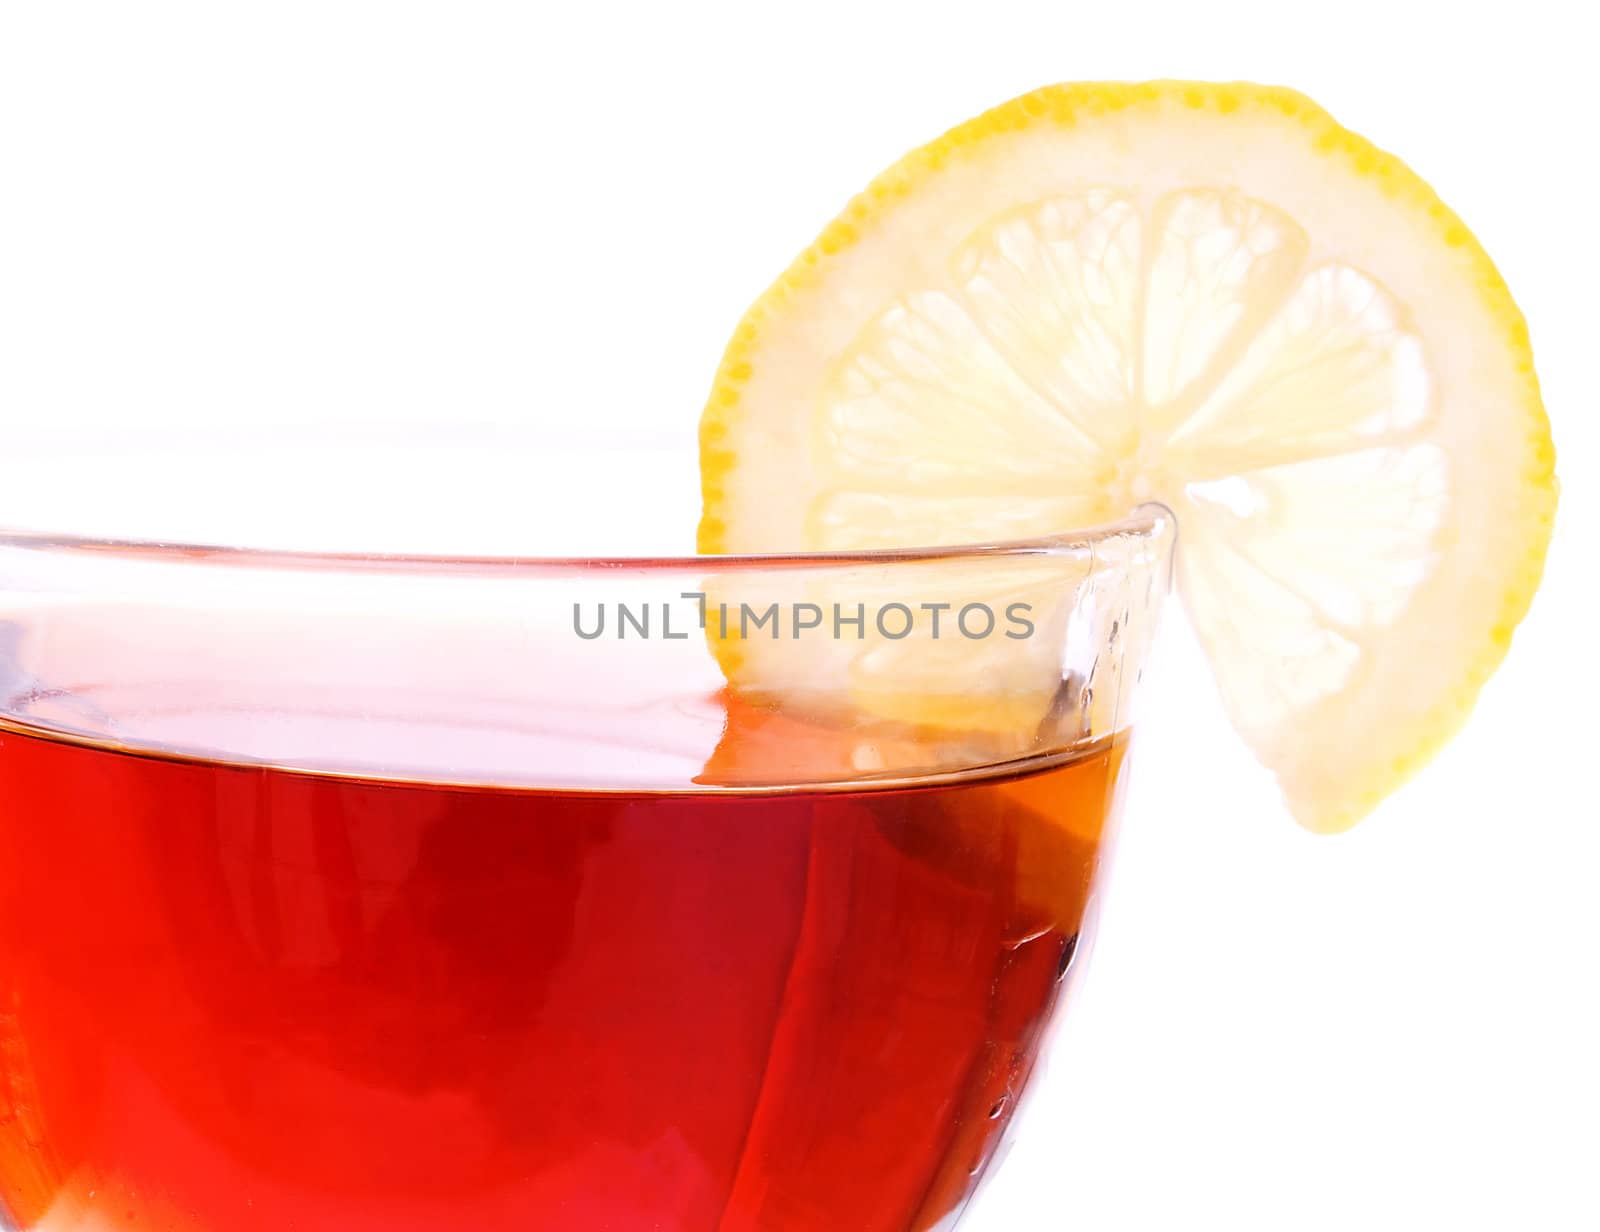 Brim of transparent cup with black tea and segment of a lemon on white background. Focus on right side of the cup.